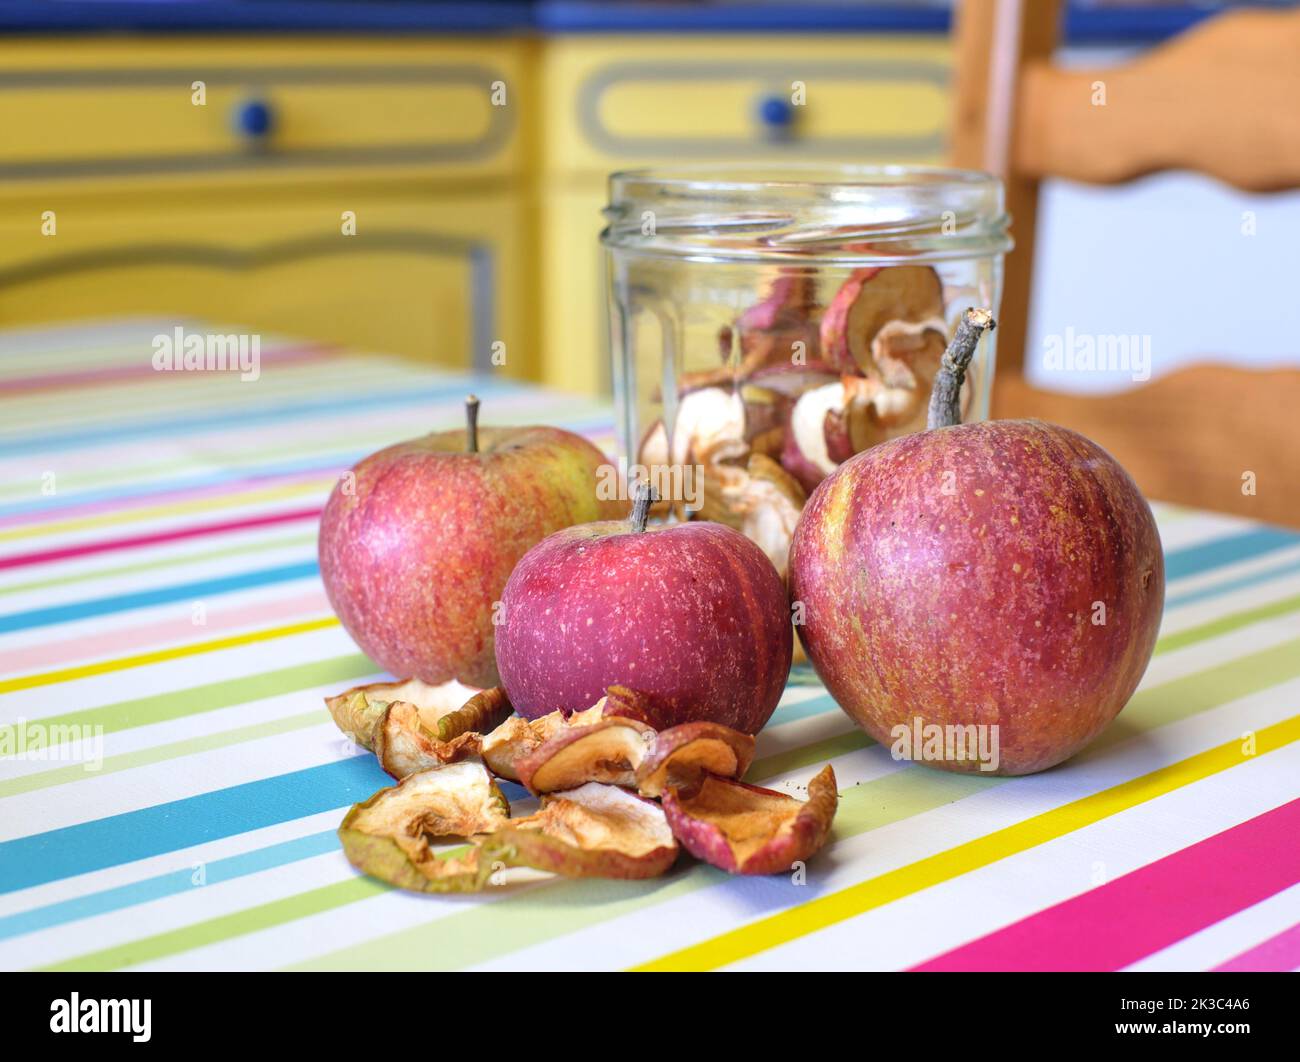 Dried apples and fresh apples placed on a wooden board, on a kitchen table Stock Photo